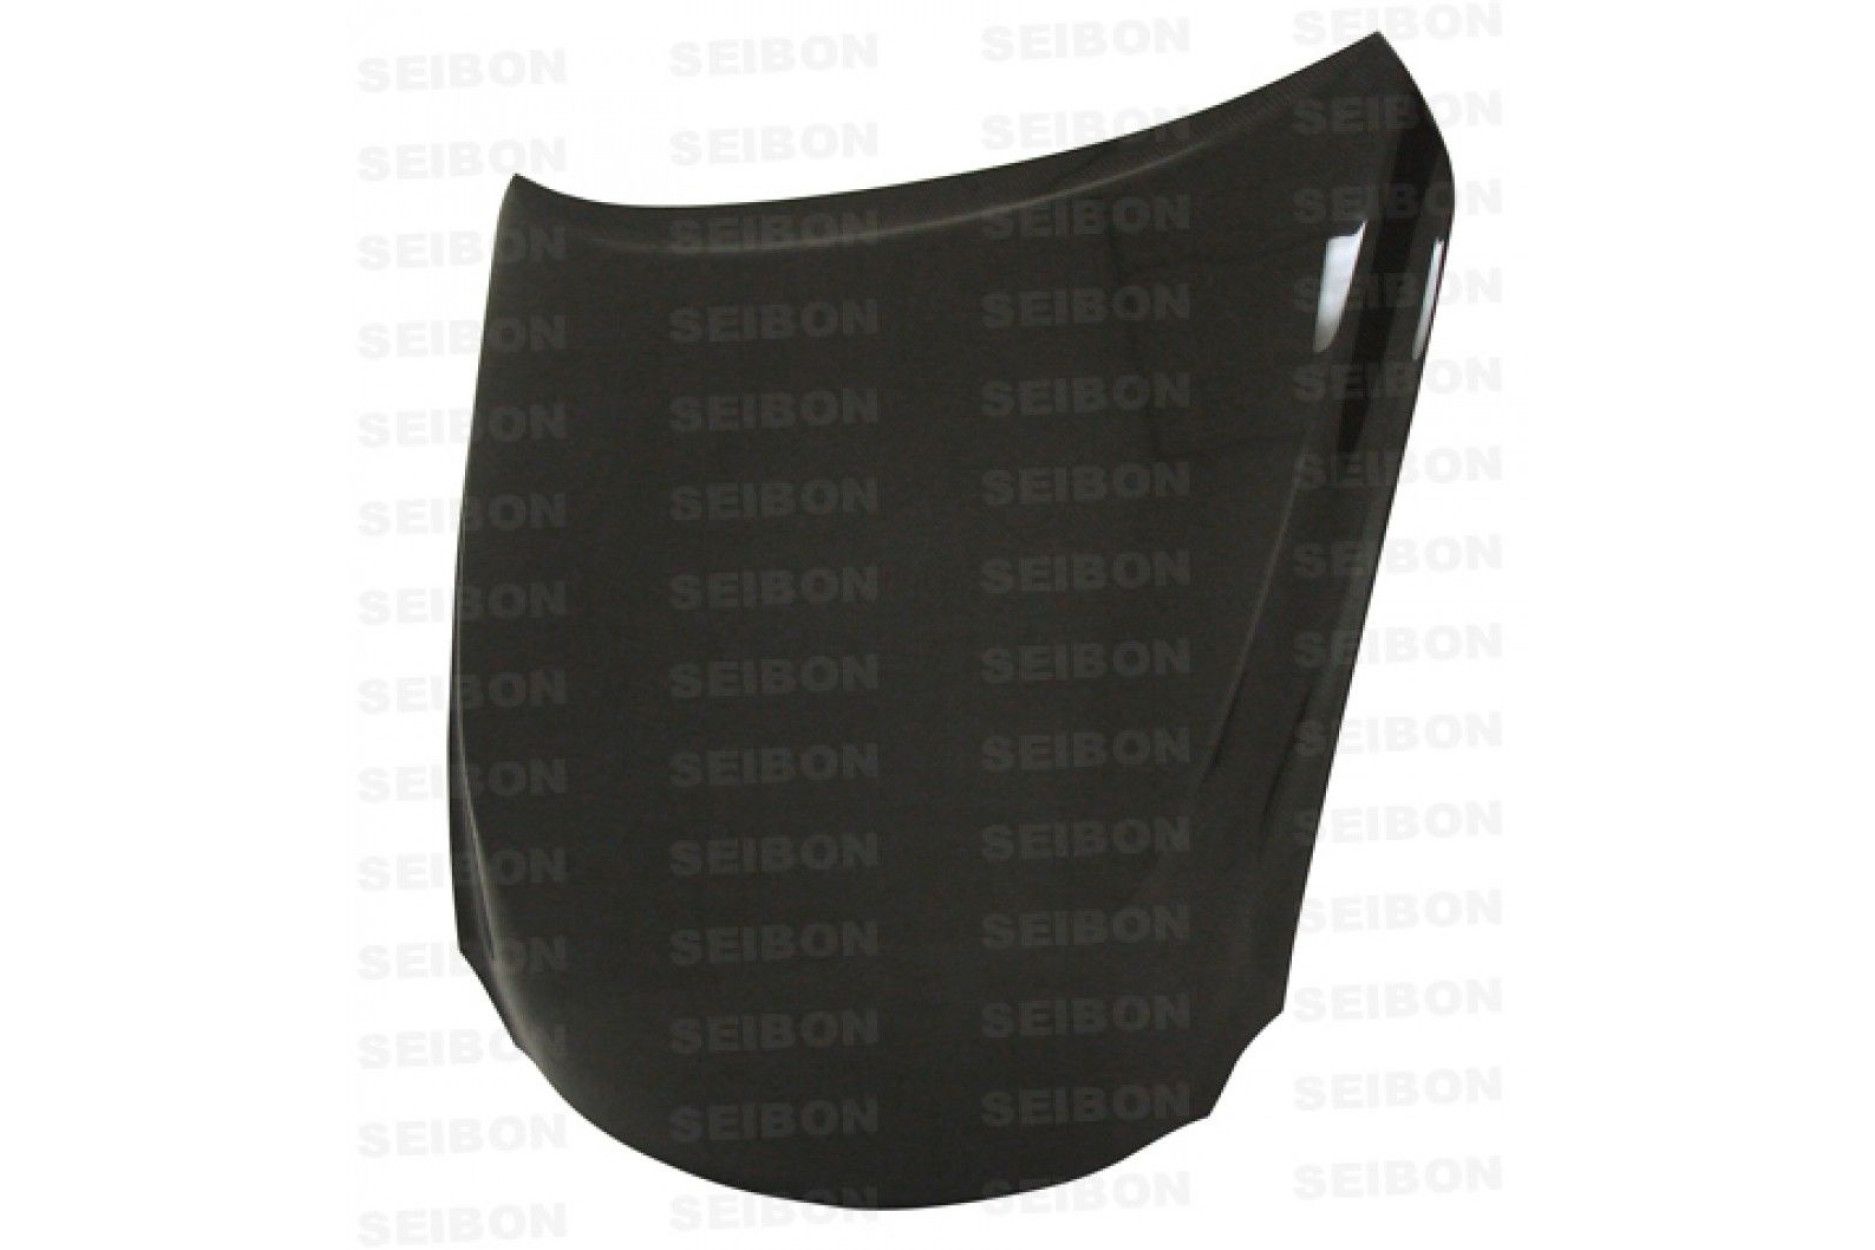 Seibon carbon HOOD for LEXUS IS-F (USE20L) 2008 - 2010 OE-style